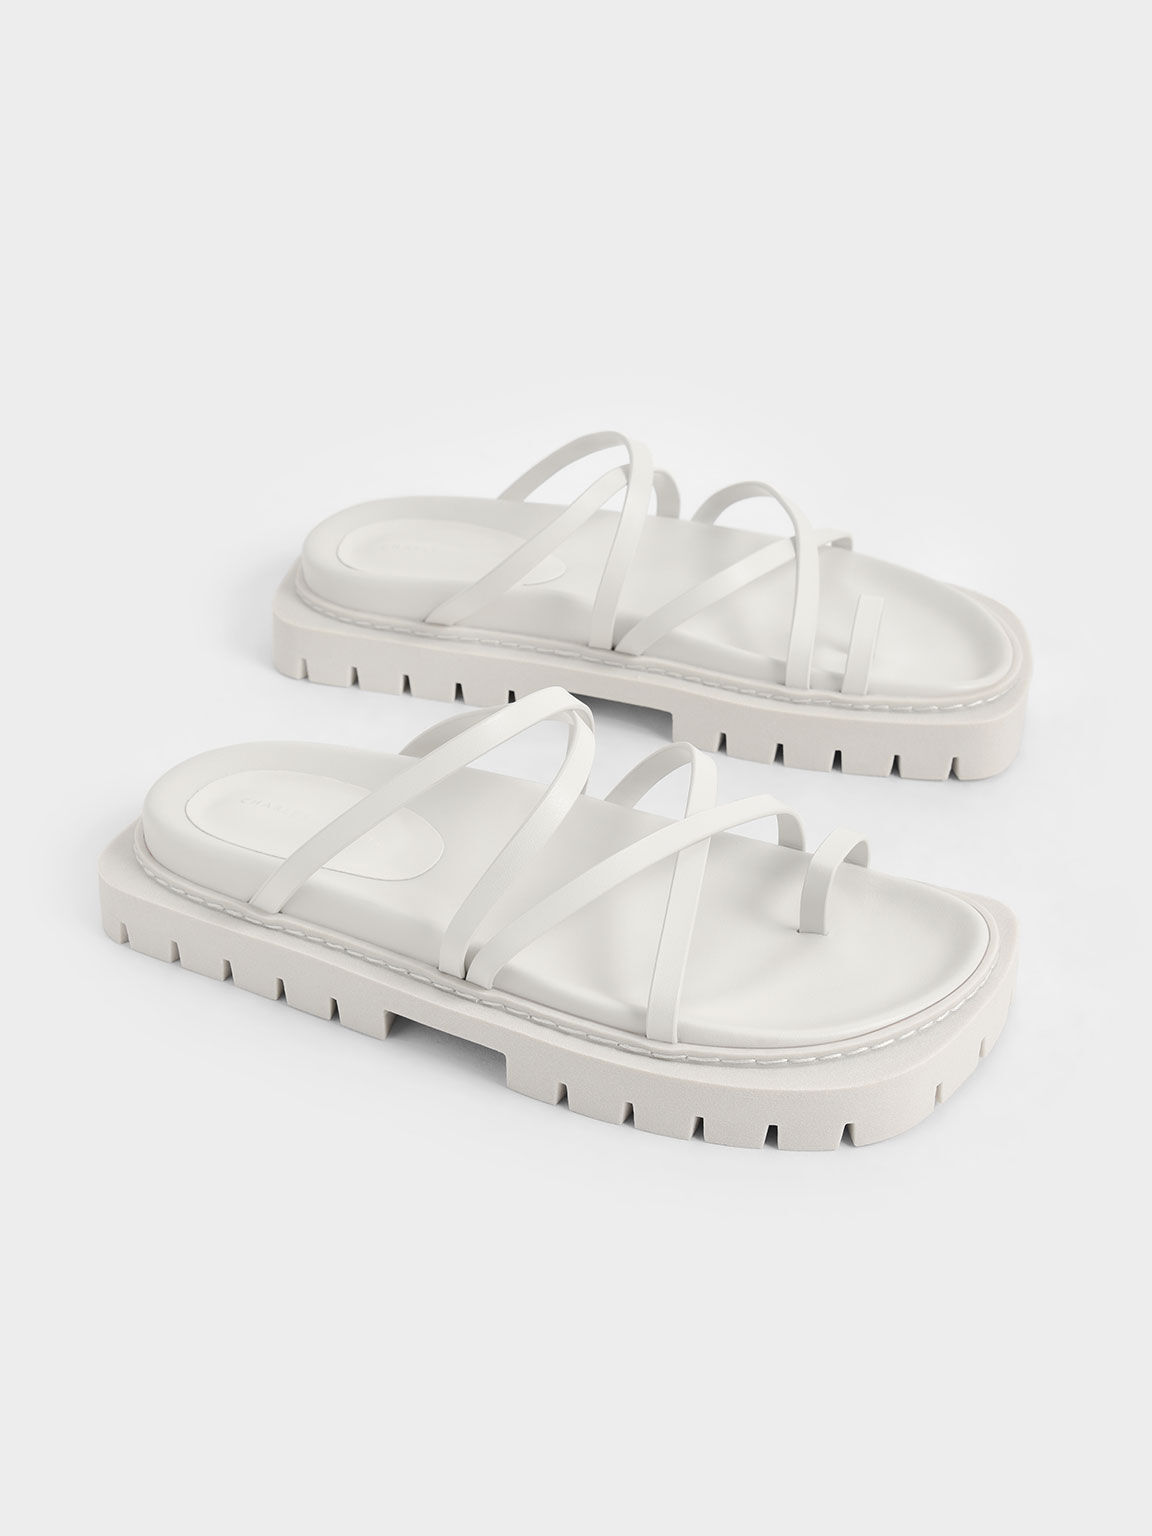 Sandal Strappy Cleated Sole, White, hi-res